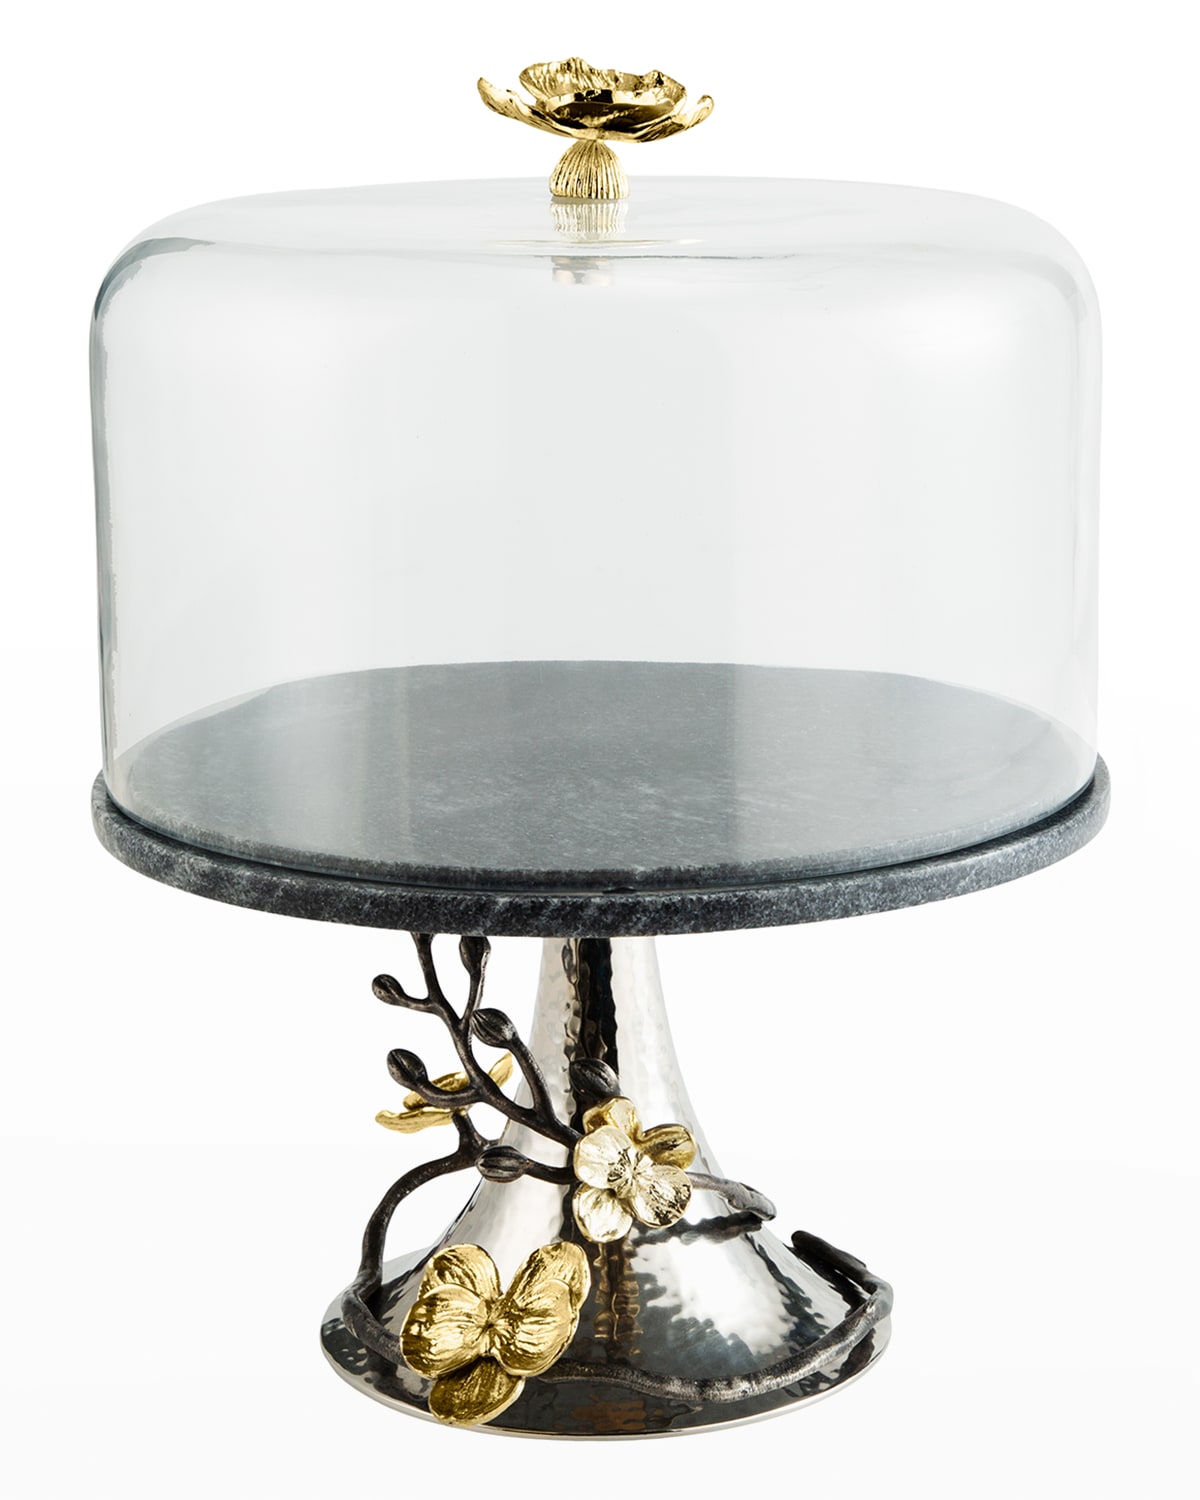 MICHAEL ARAM GOLD ORCHID CAKE STAND WITH DOME